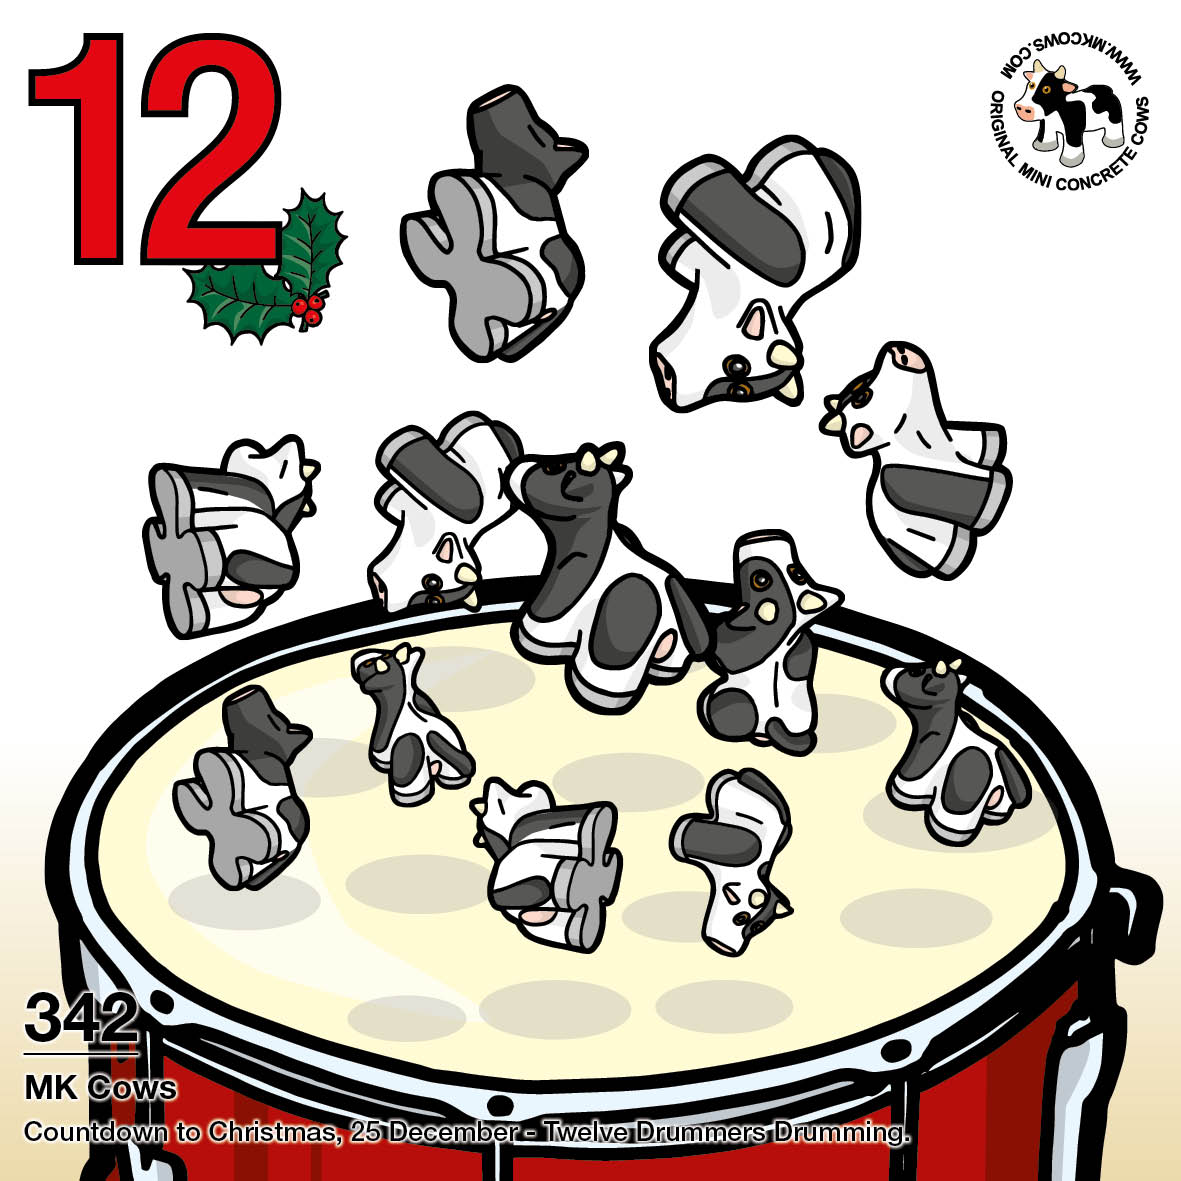 On the twelfth day of Christmas my moo cow gave to me... twelve drummers drumming (with Mini Concrete Cows!)